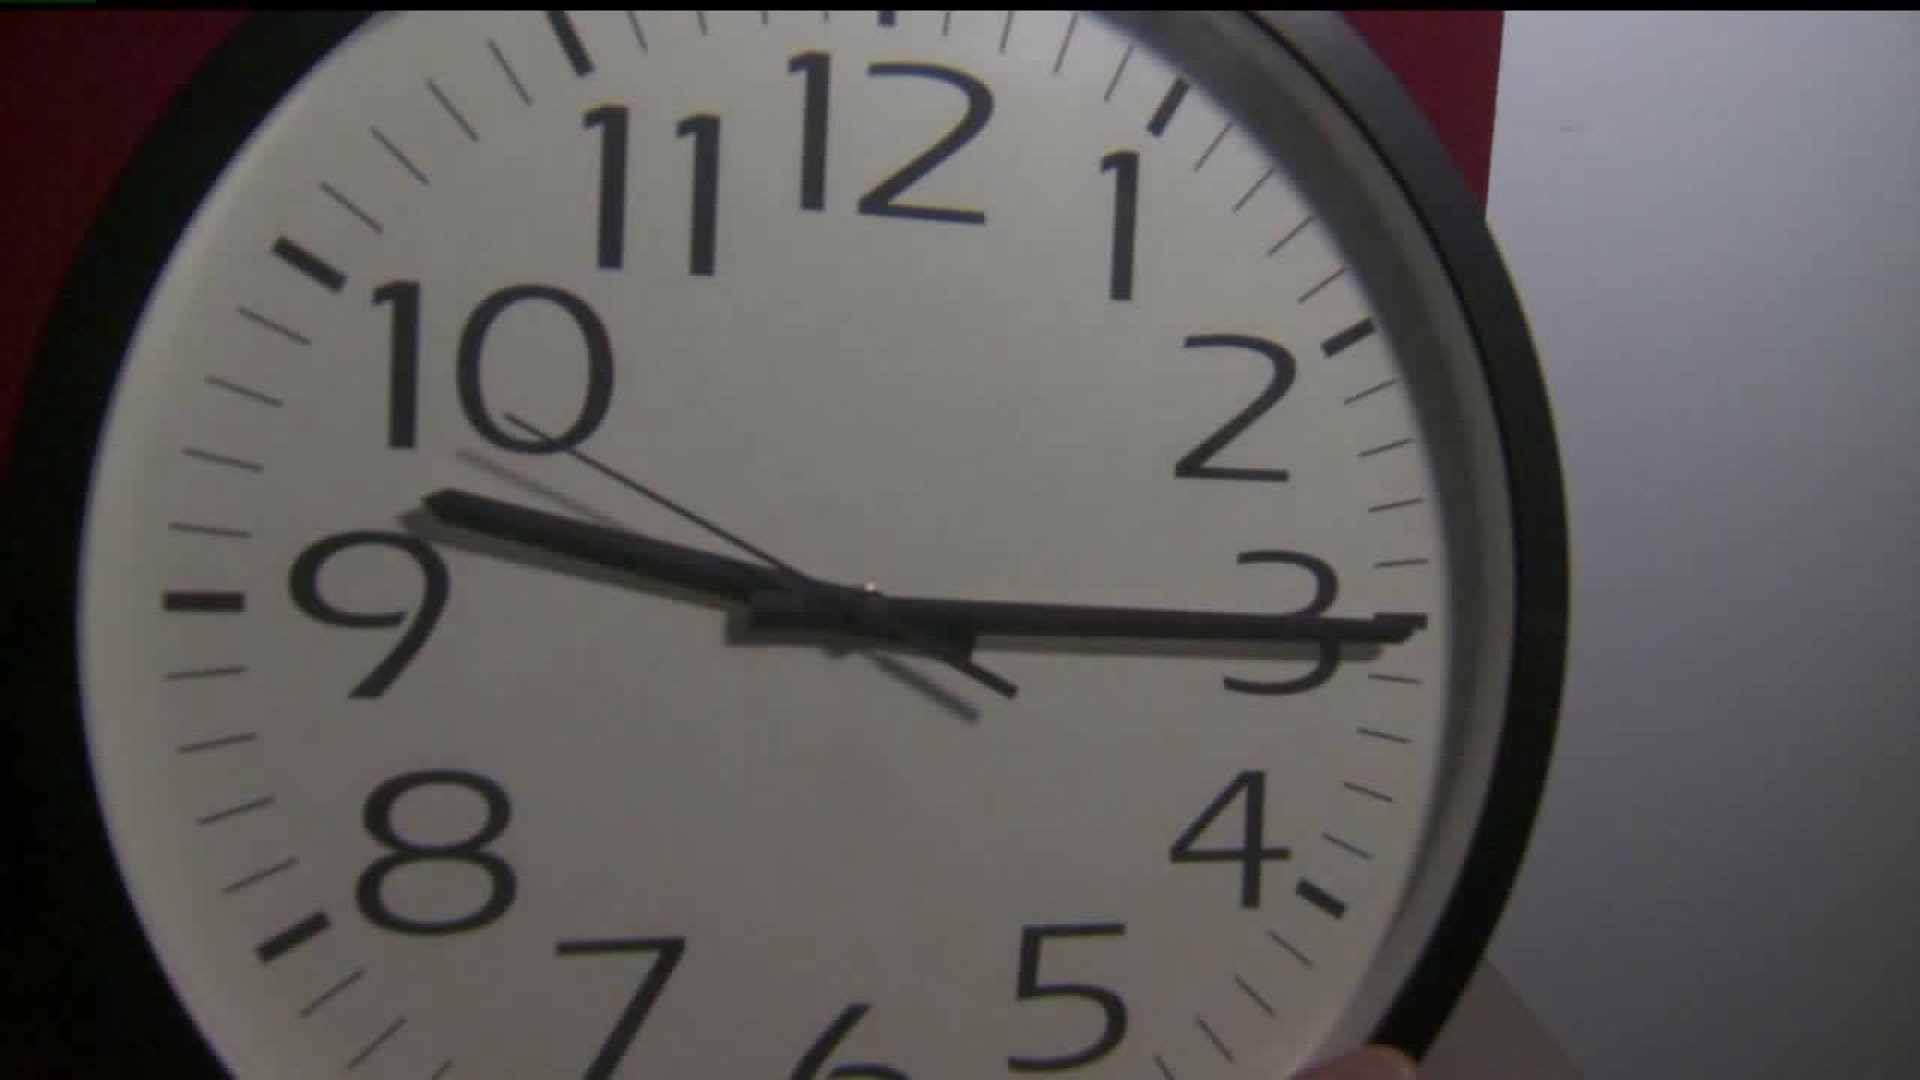 State Senator introduces a resolution to get rid of Daylight Saving Time